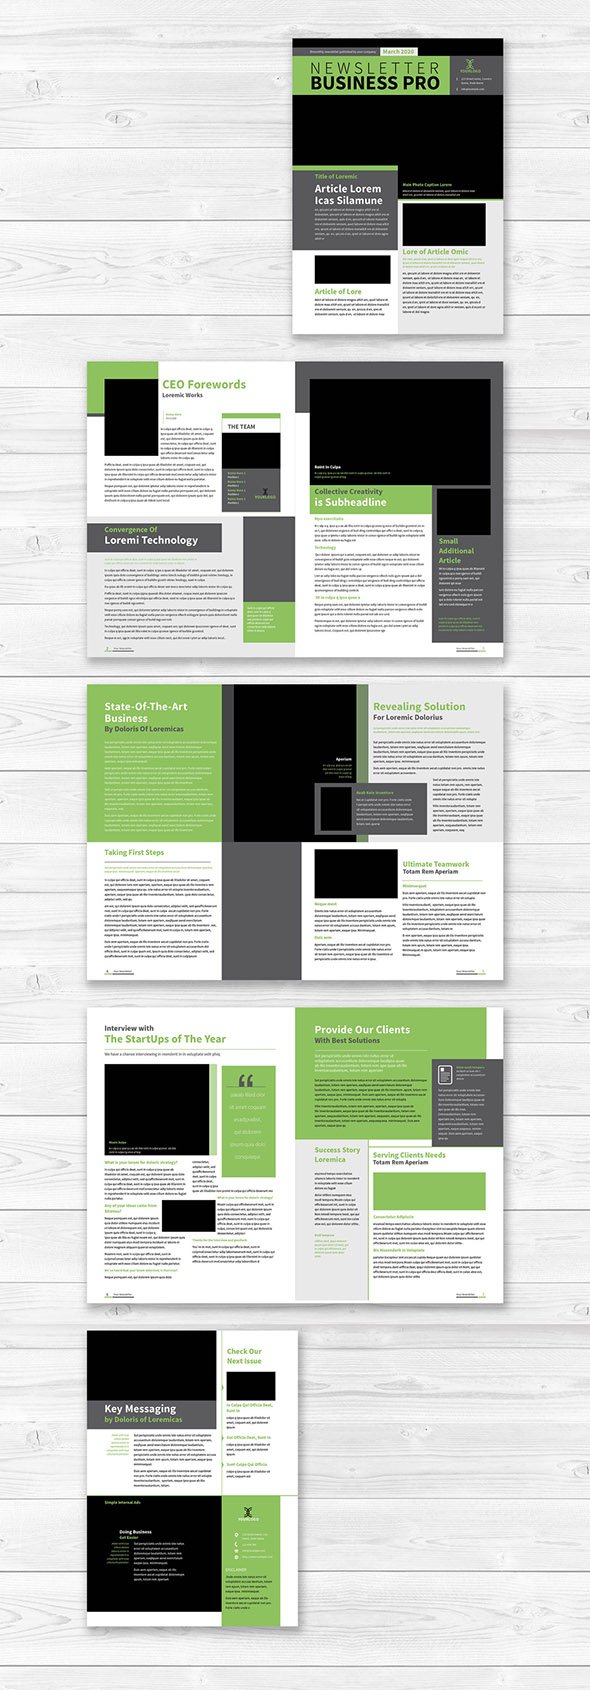 AdobeStock - Newsletter Layout with Green Accents - 215835652